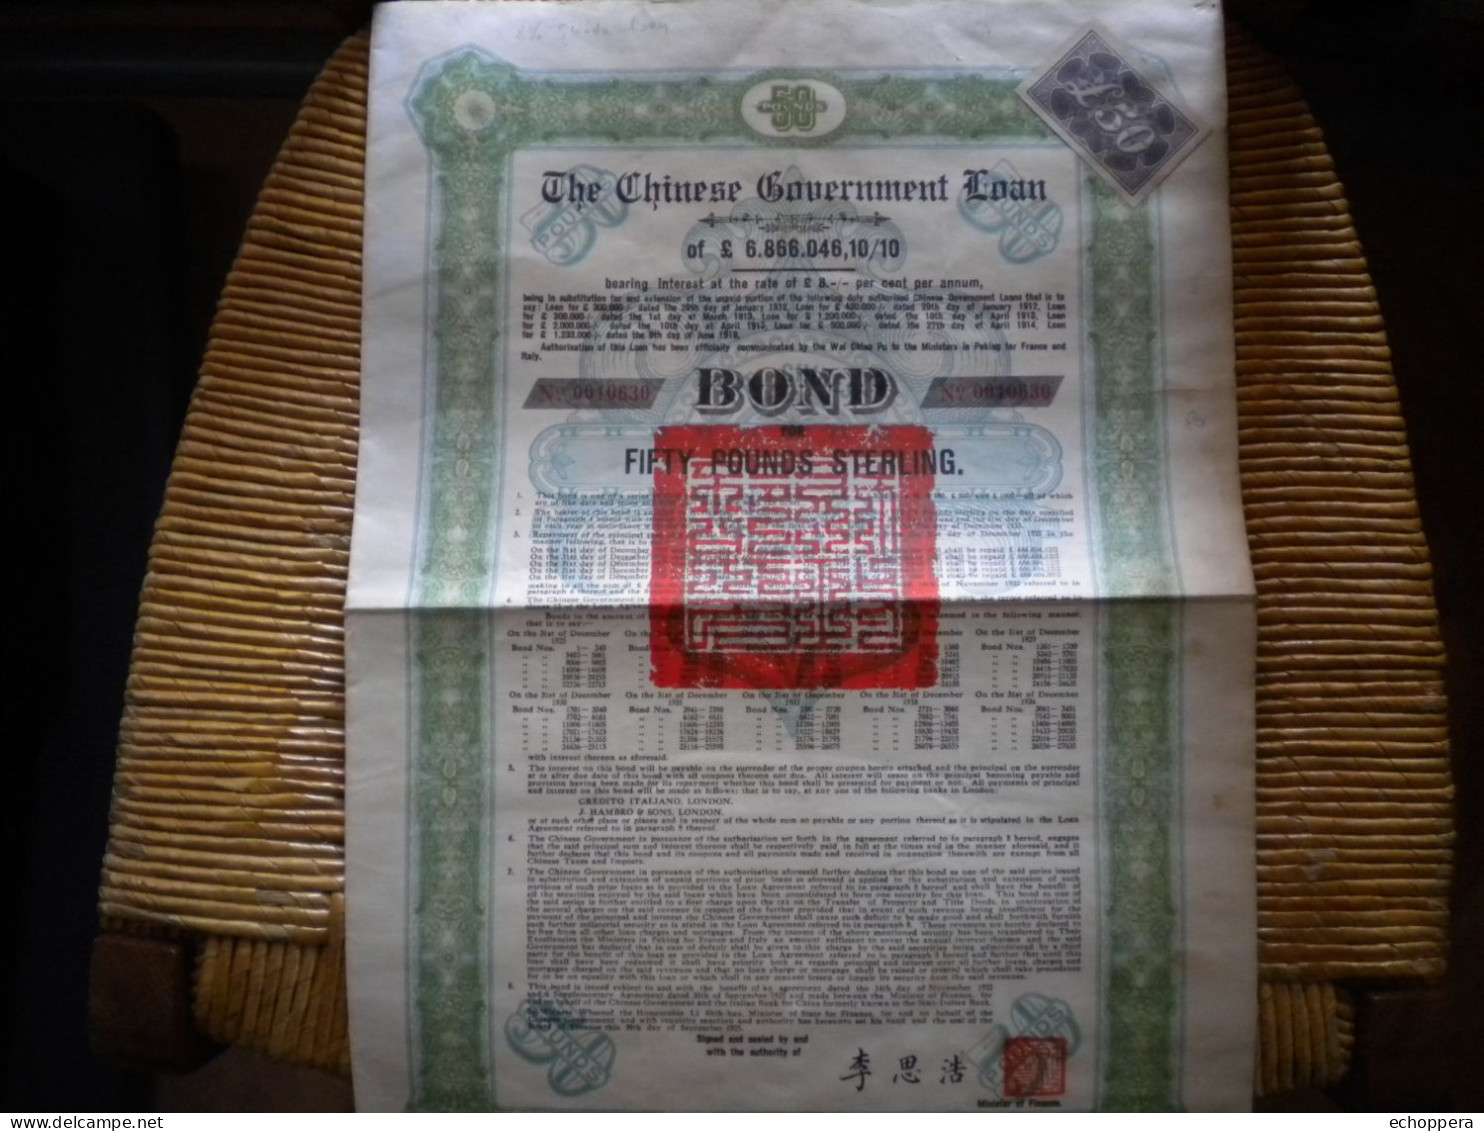 THE CHINESE GOVERNMENT LOAN - 50 £ Sterling  8%  CANTON KOWLOON RAILWAYS - 1925 - Asie